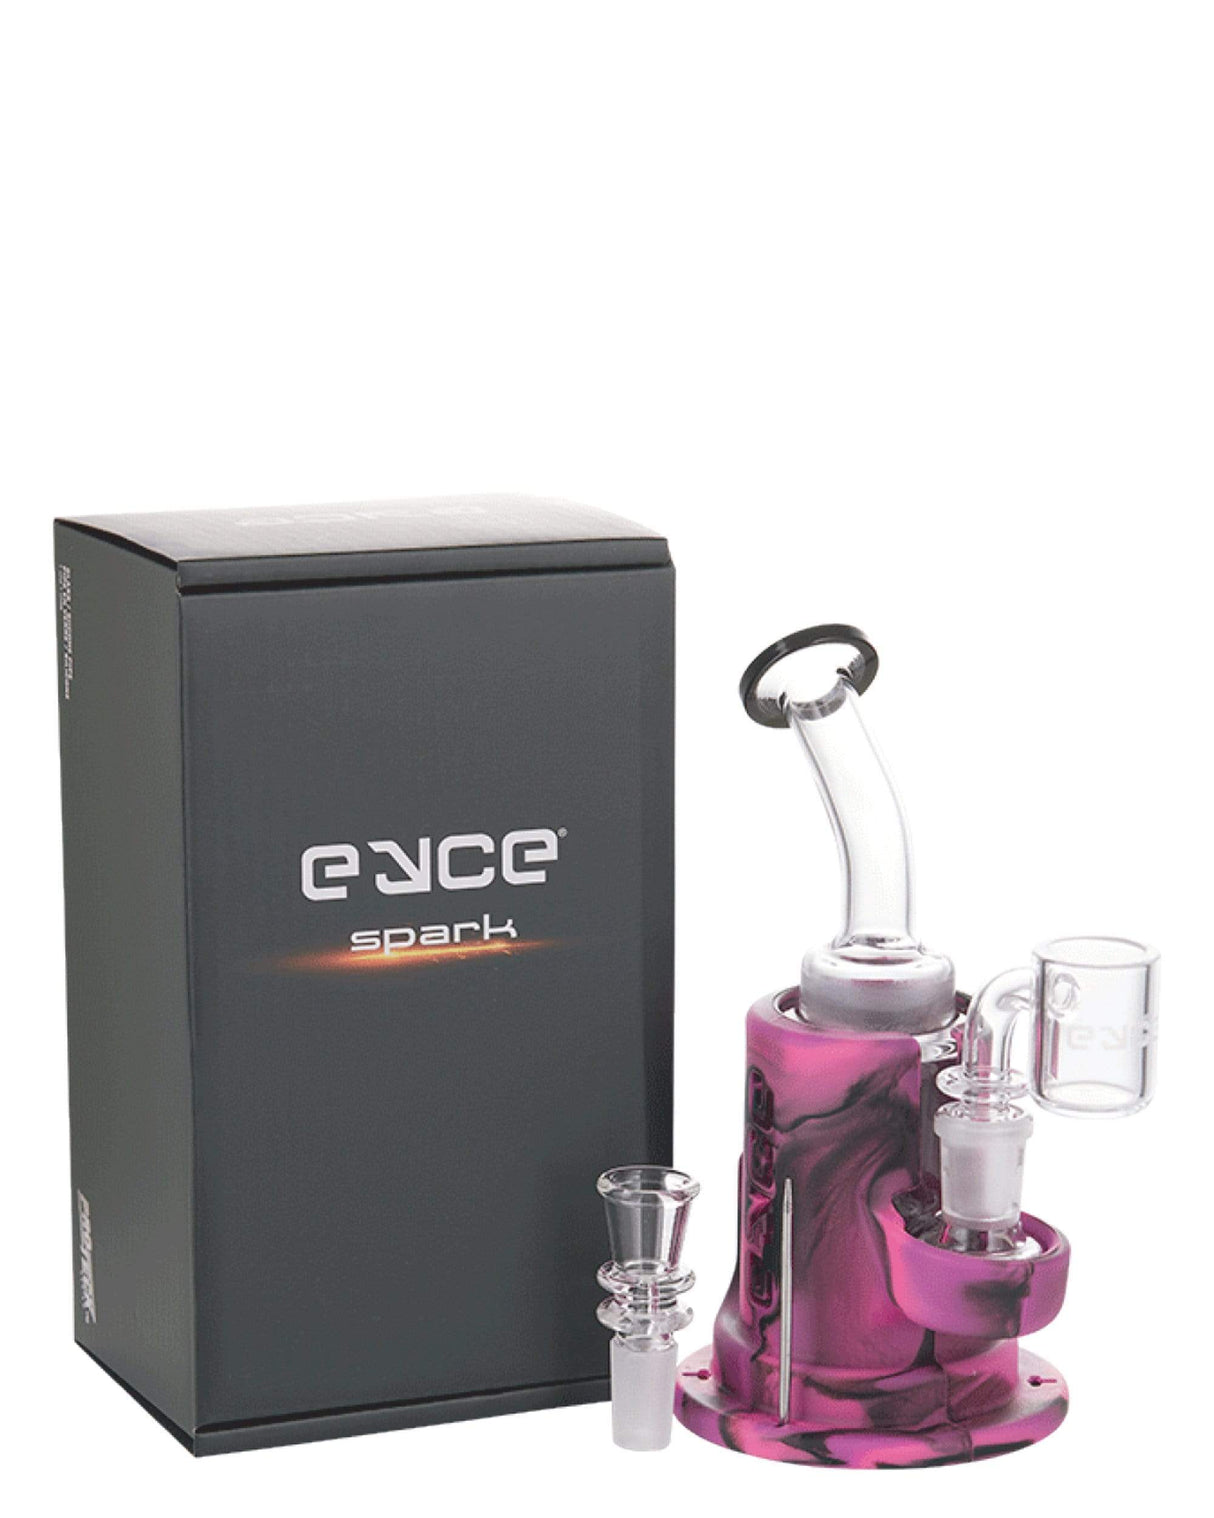 Eyce Spark Dab Rig in Purple with Showerhead Percolator and Glass Packaging